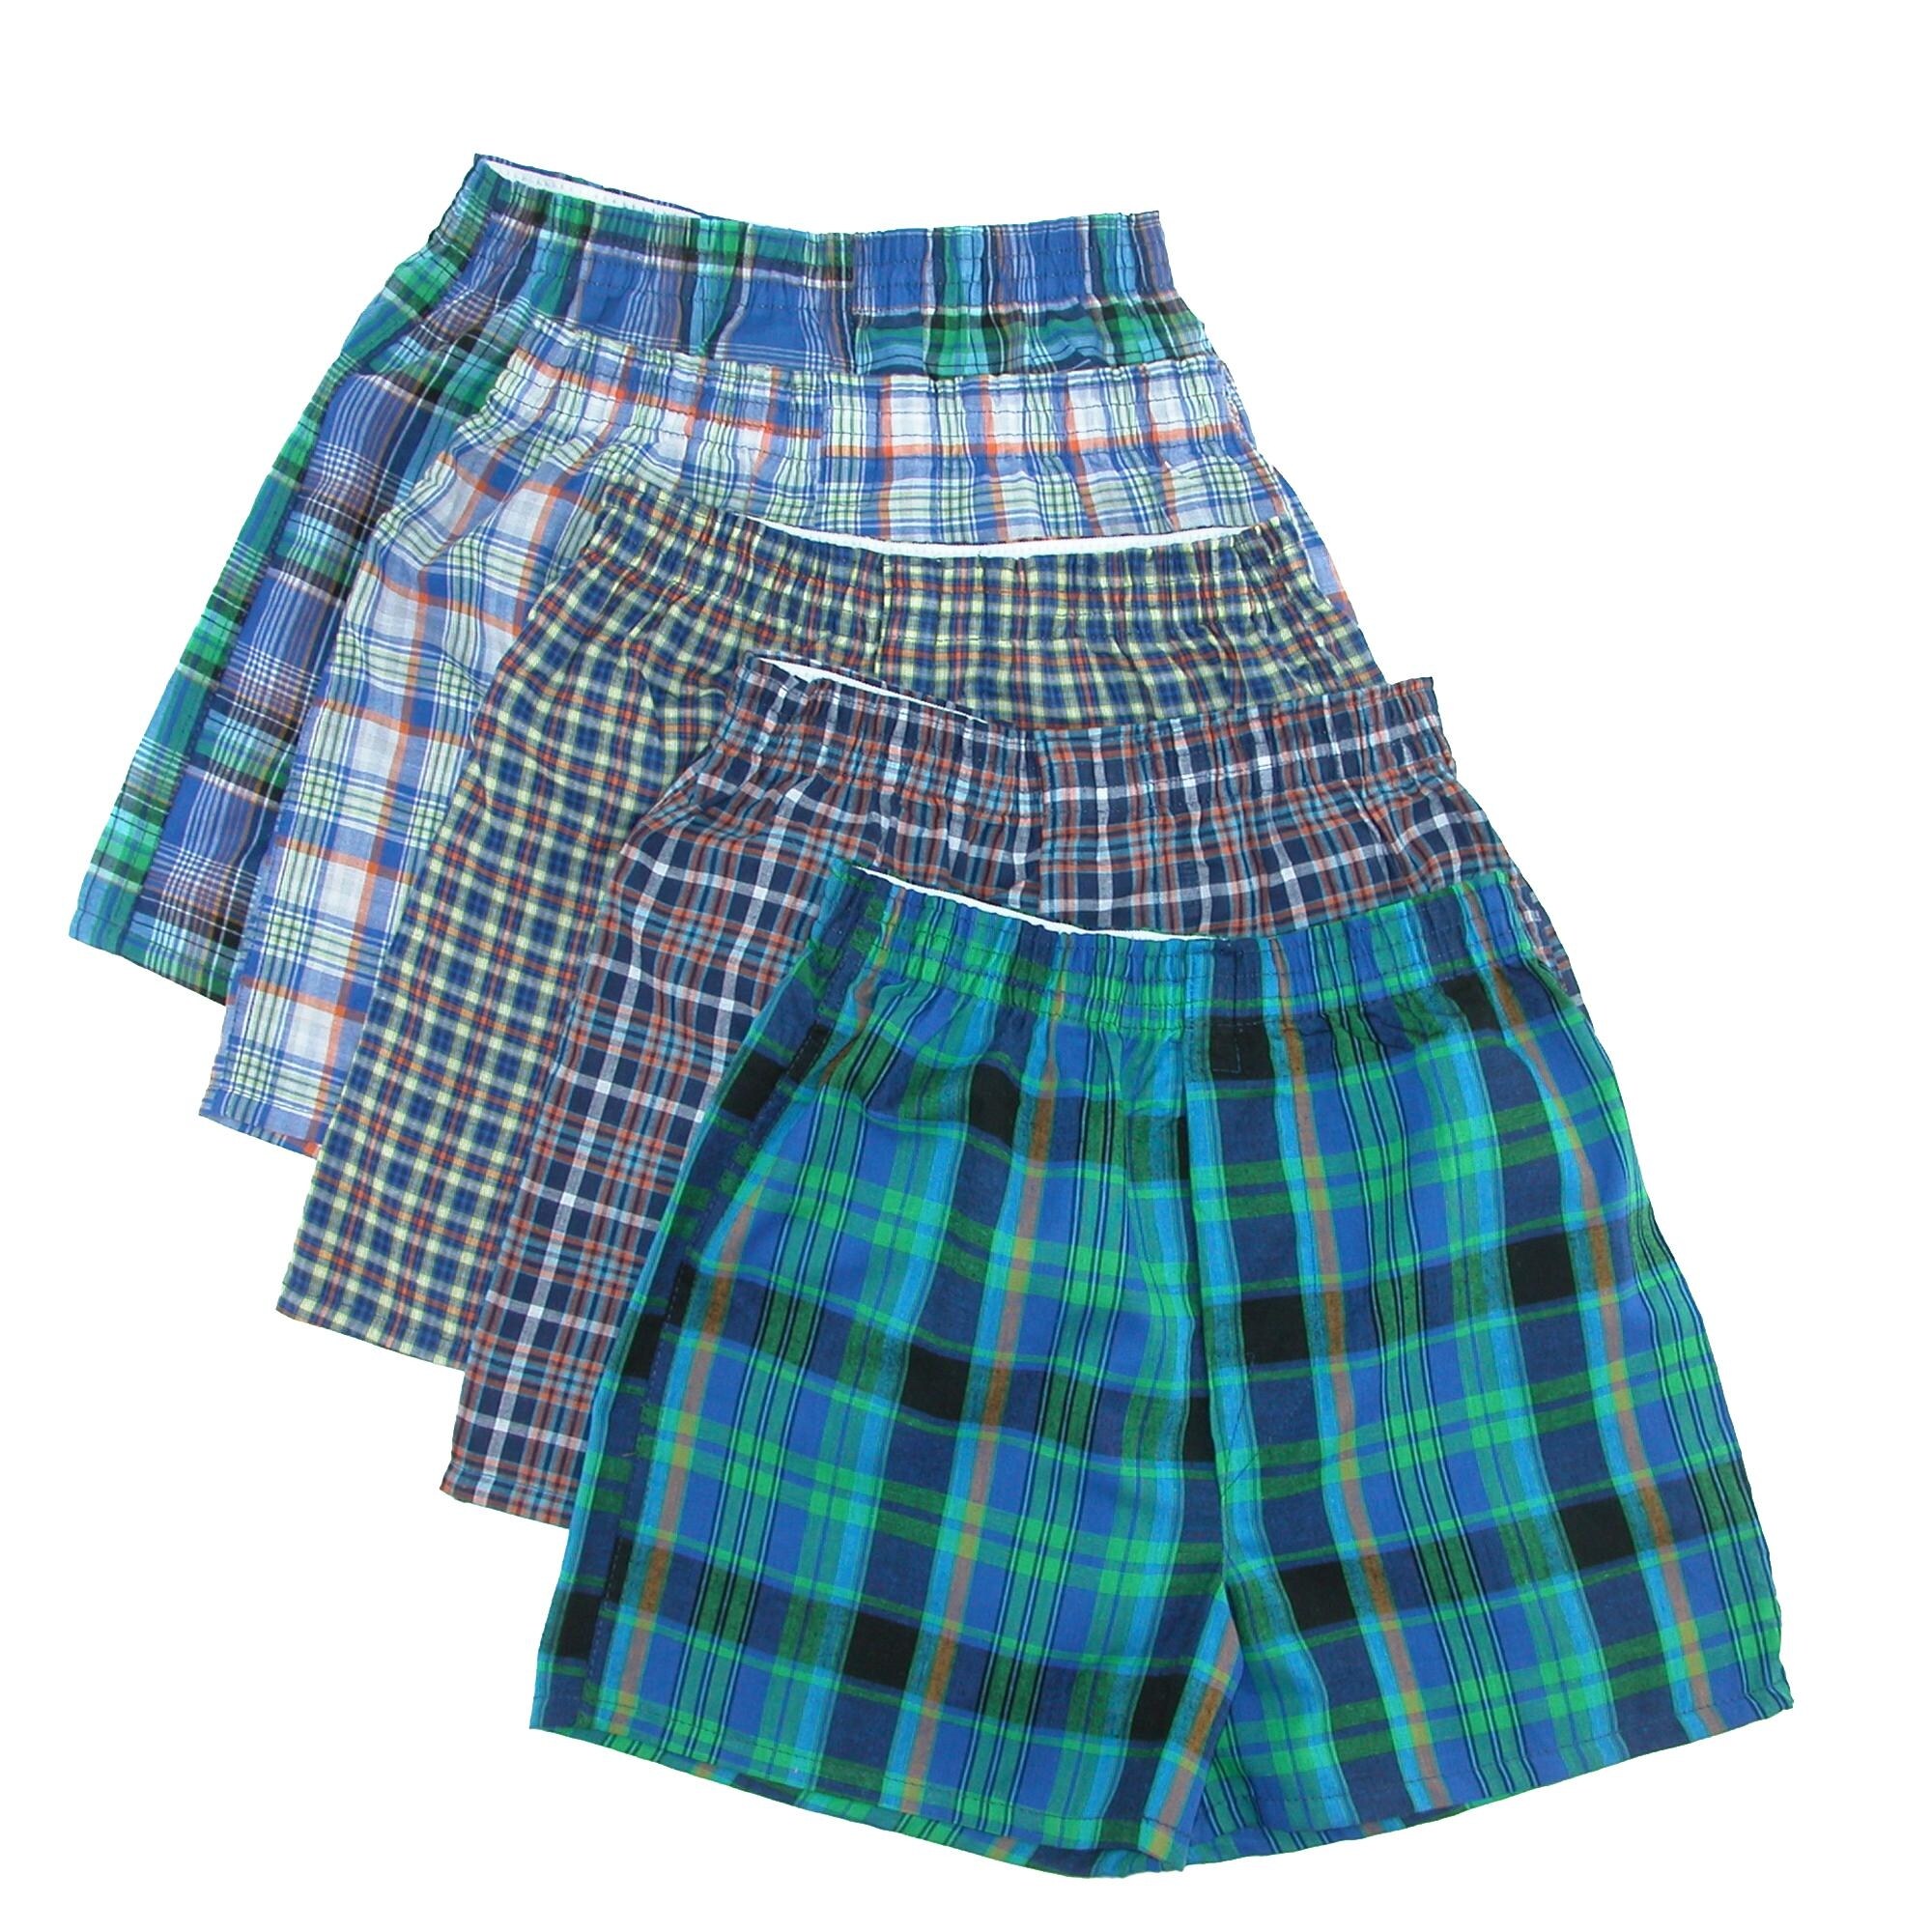 Boys Fruit of the Loom 10Pack Boys Plaid Boxers Boxer Shorts Kids ...